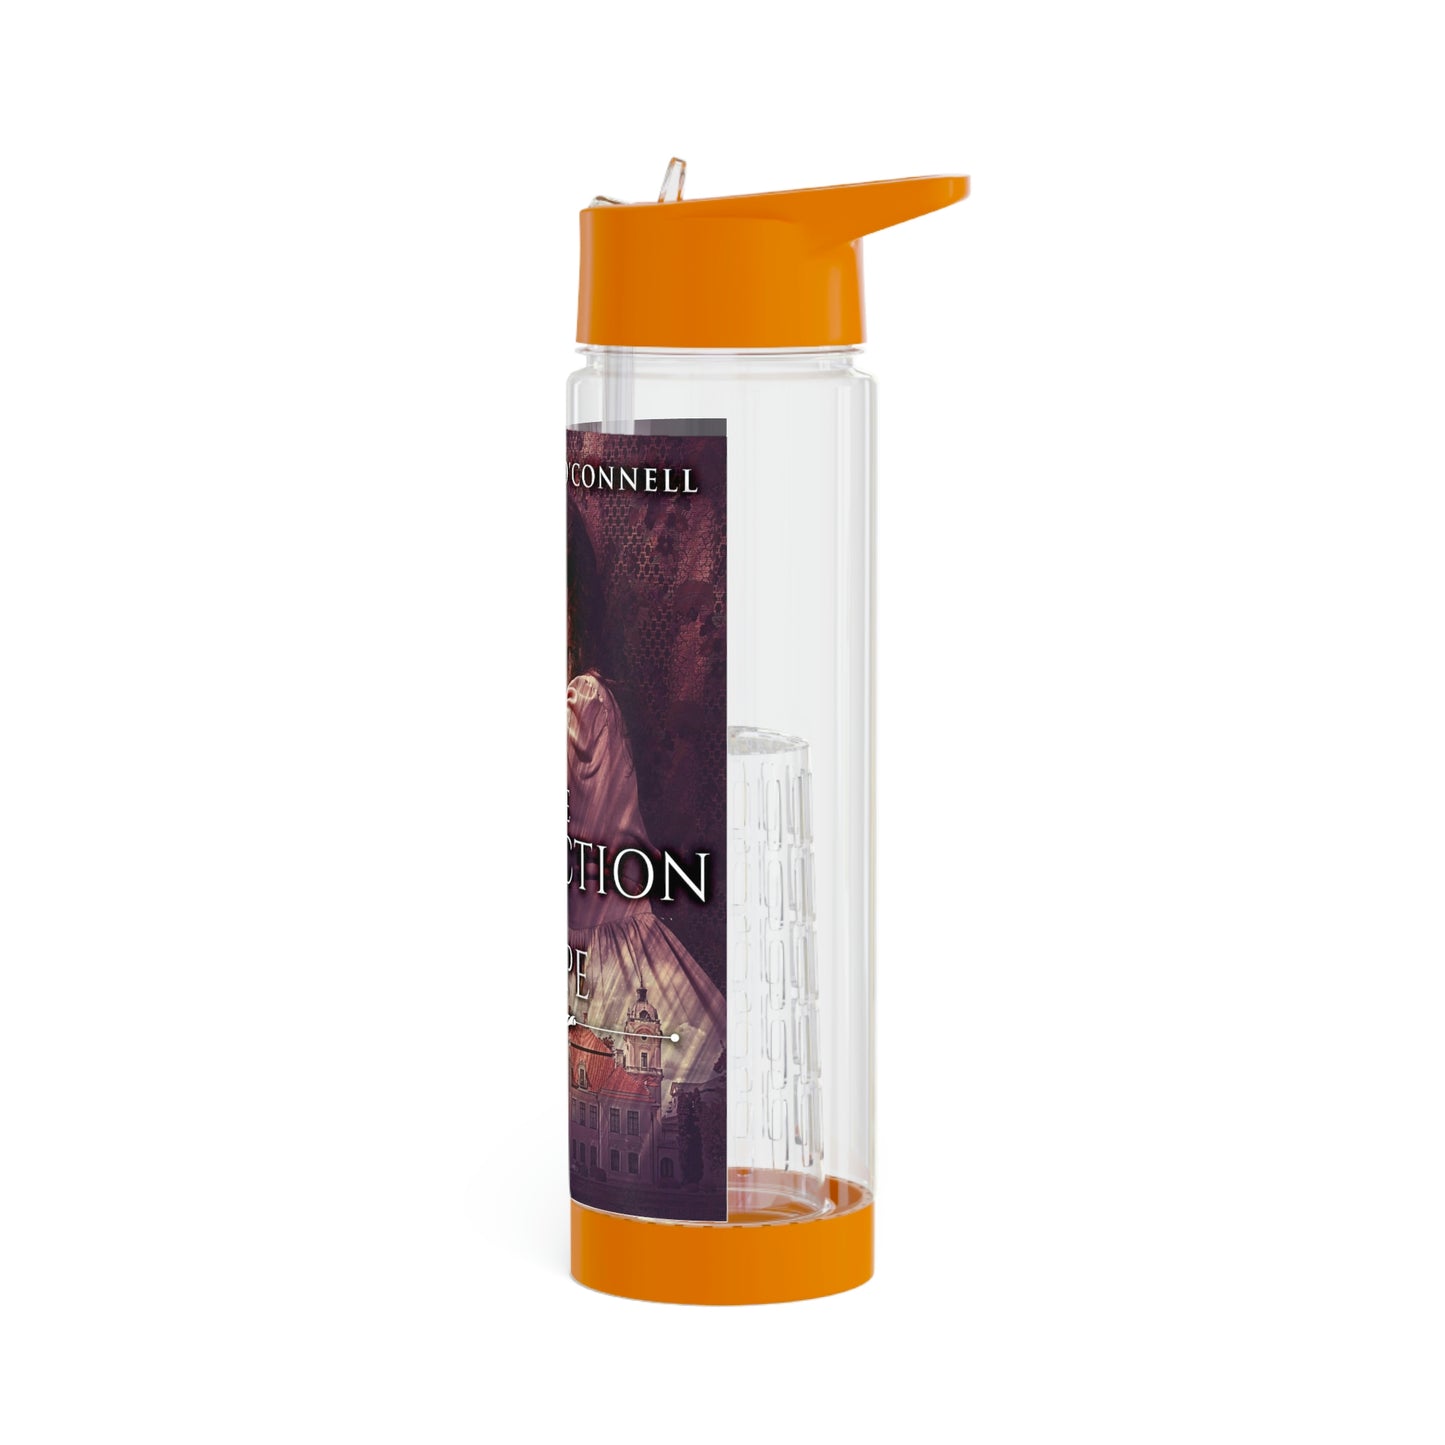 The Conviction Of Hope - Infuser Water Bottle